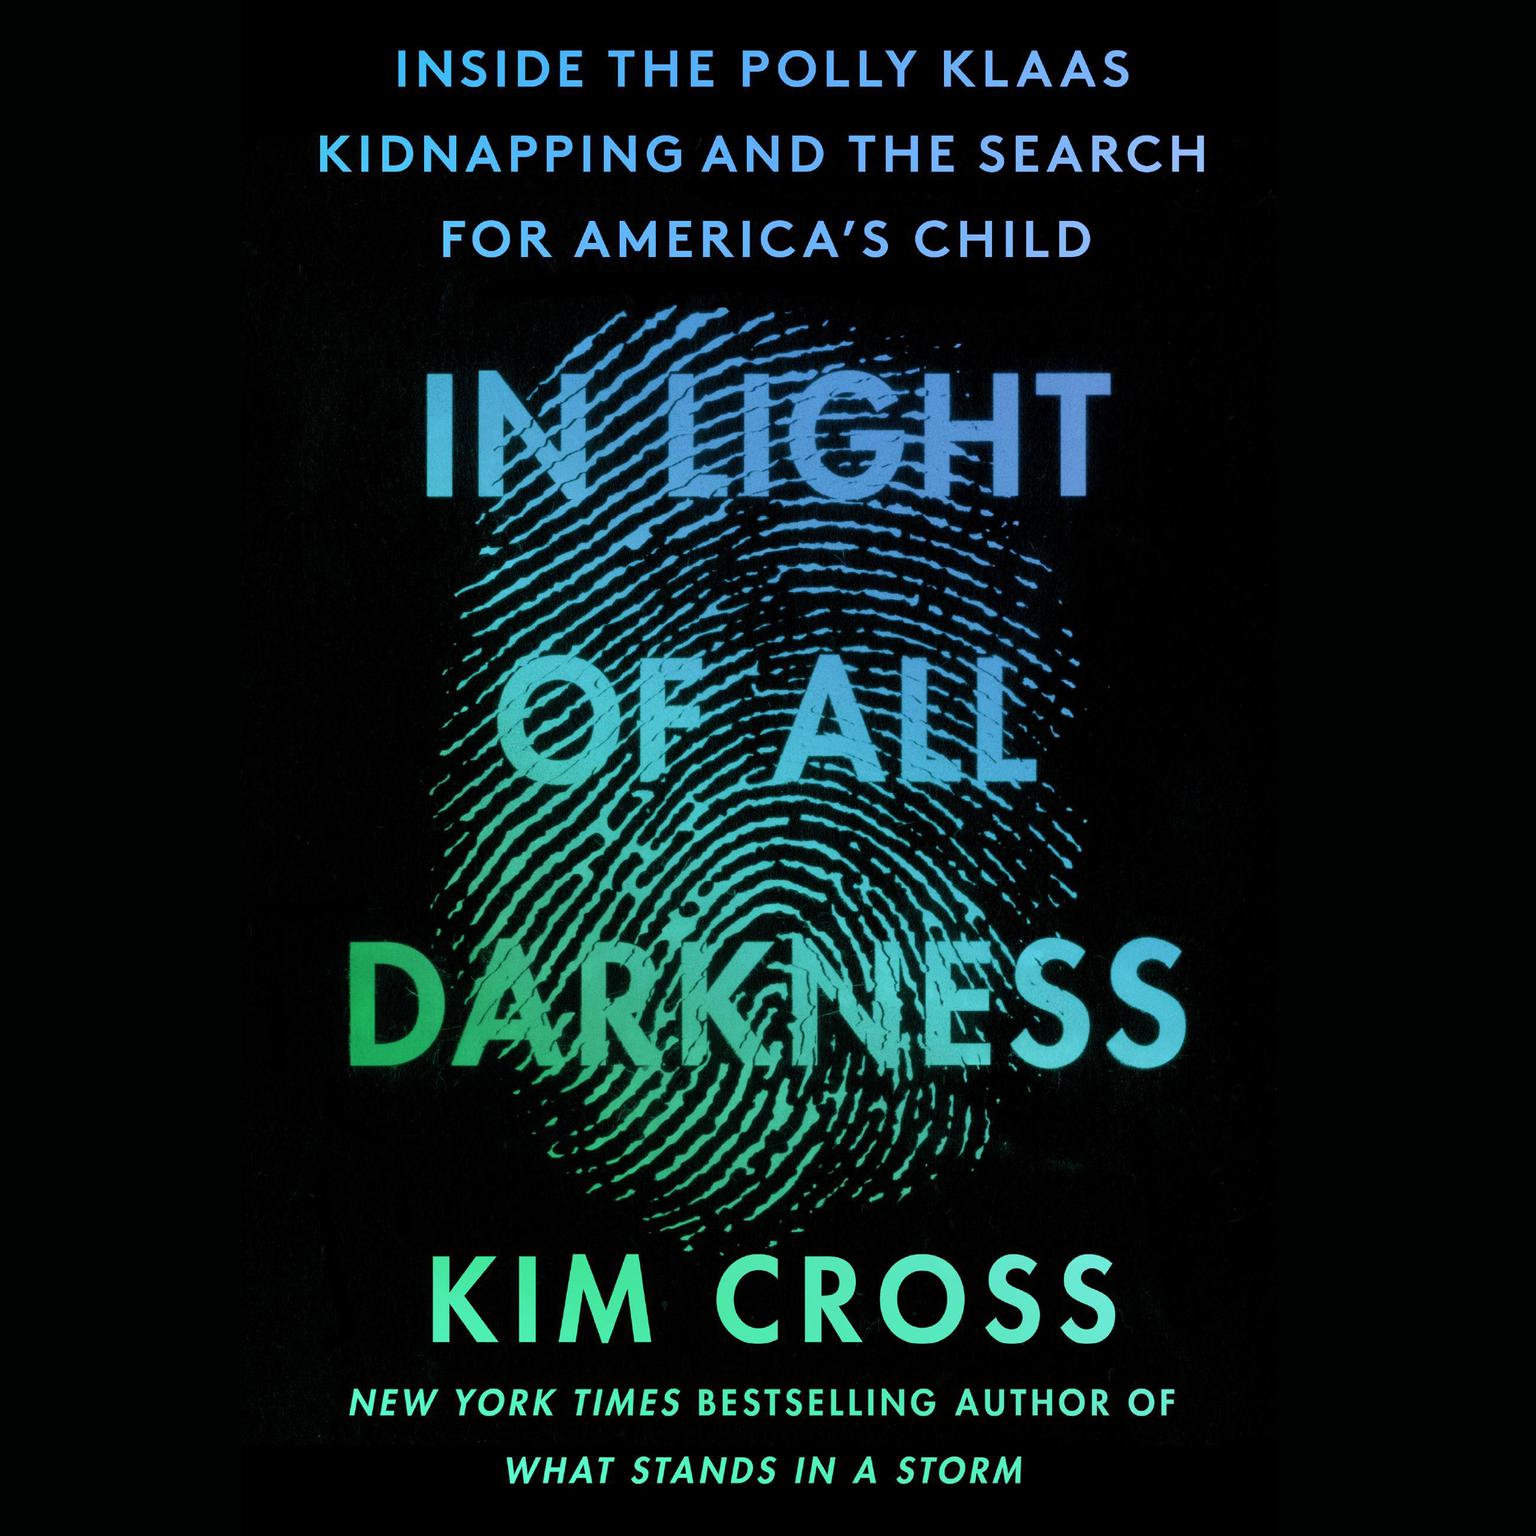 In Light of All Darkness: Inside the Polly Klaas Kidnapping and the Search for Americas Child Audiobook, by Kim Cross